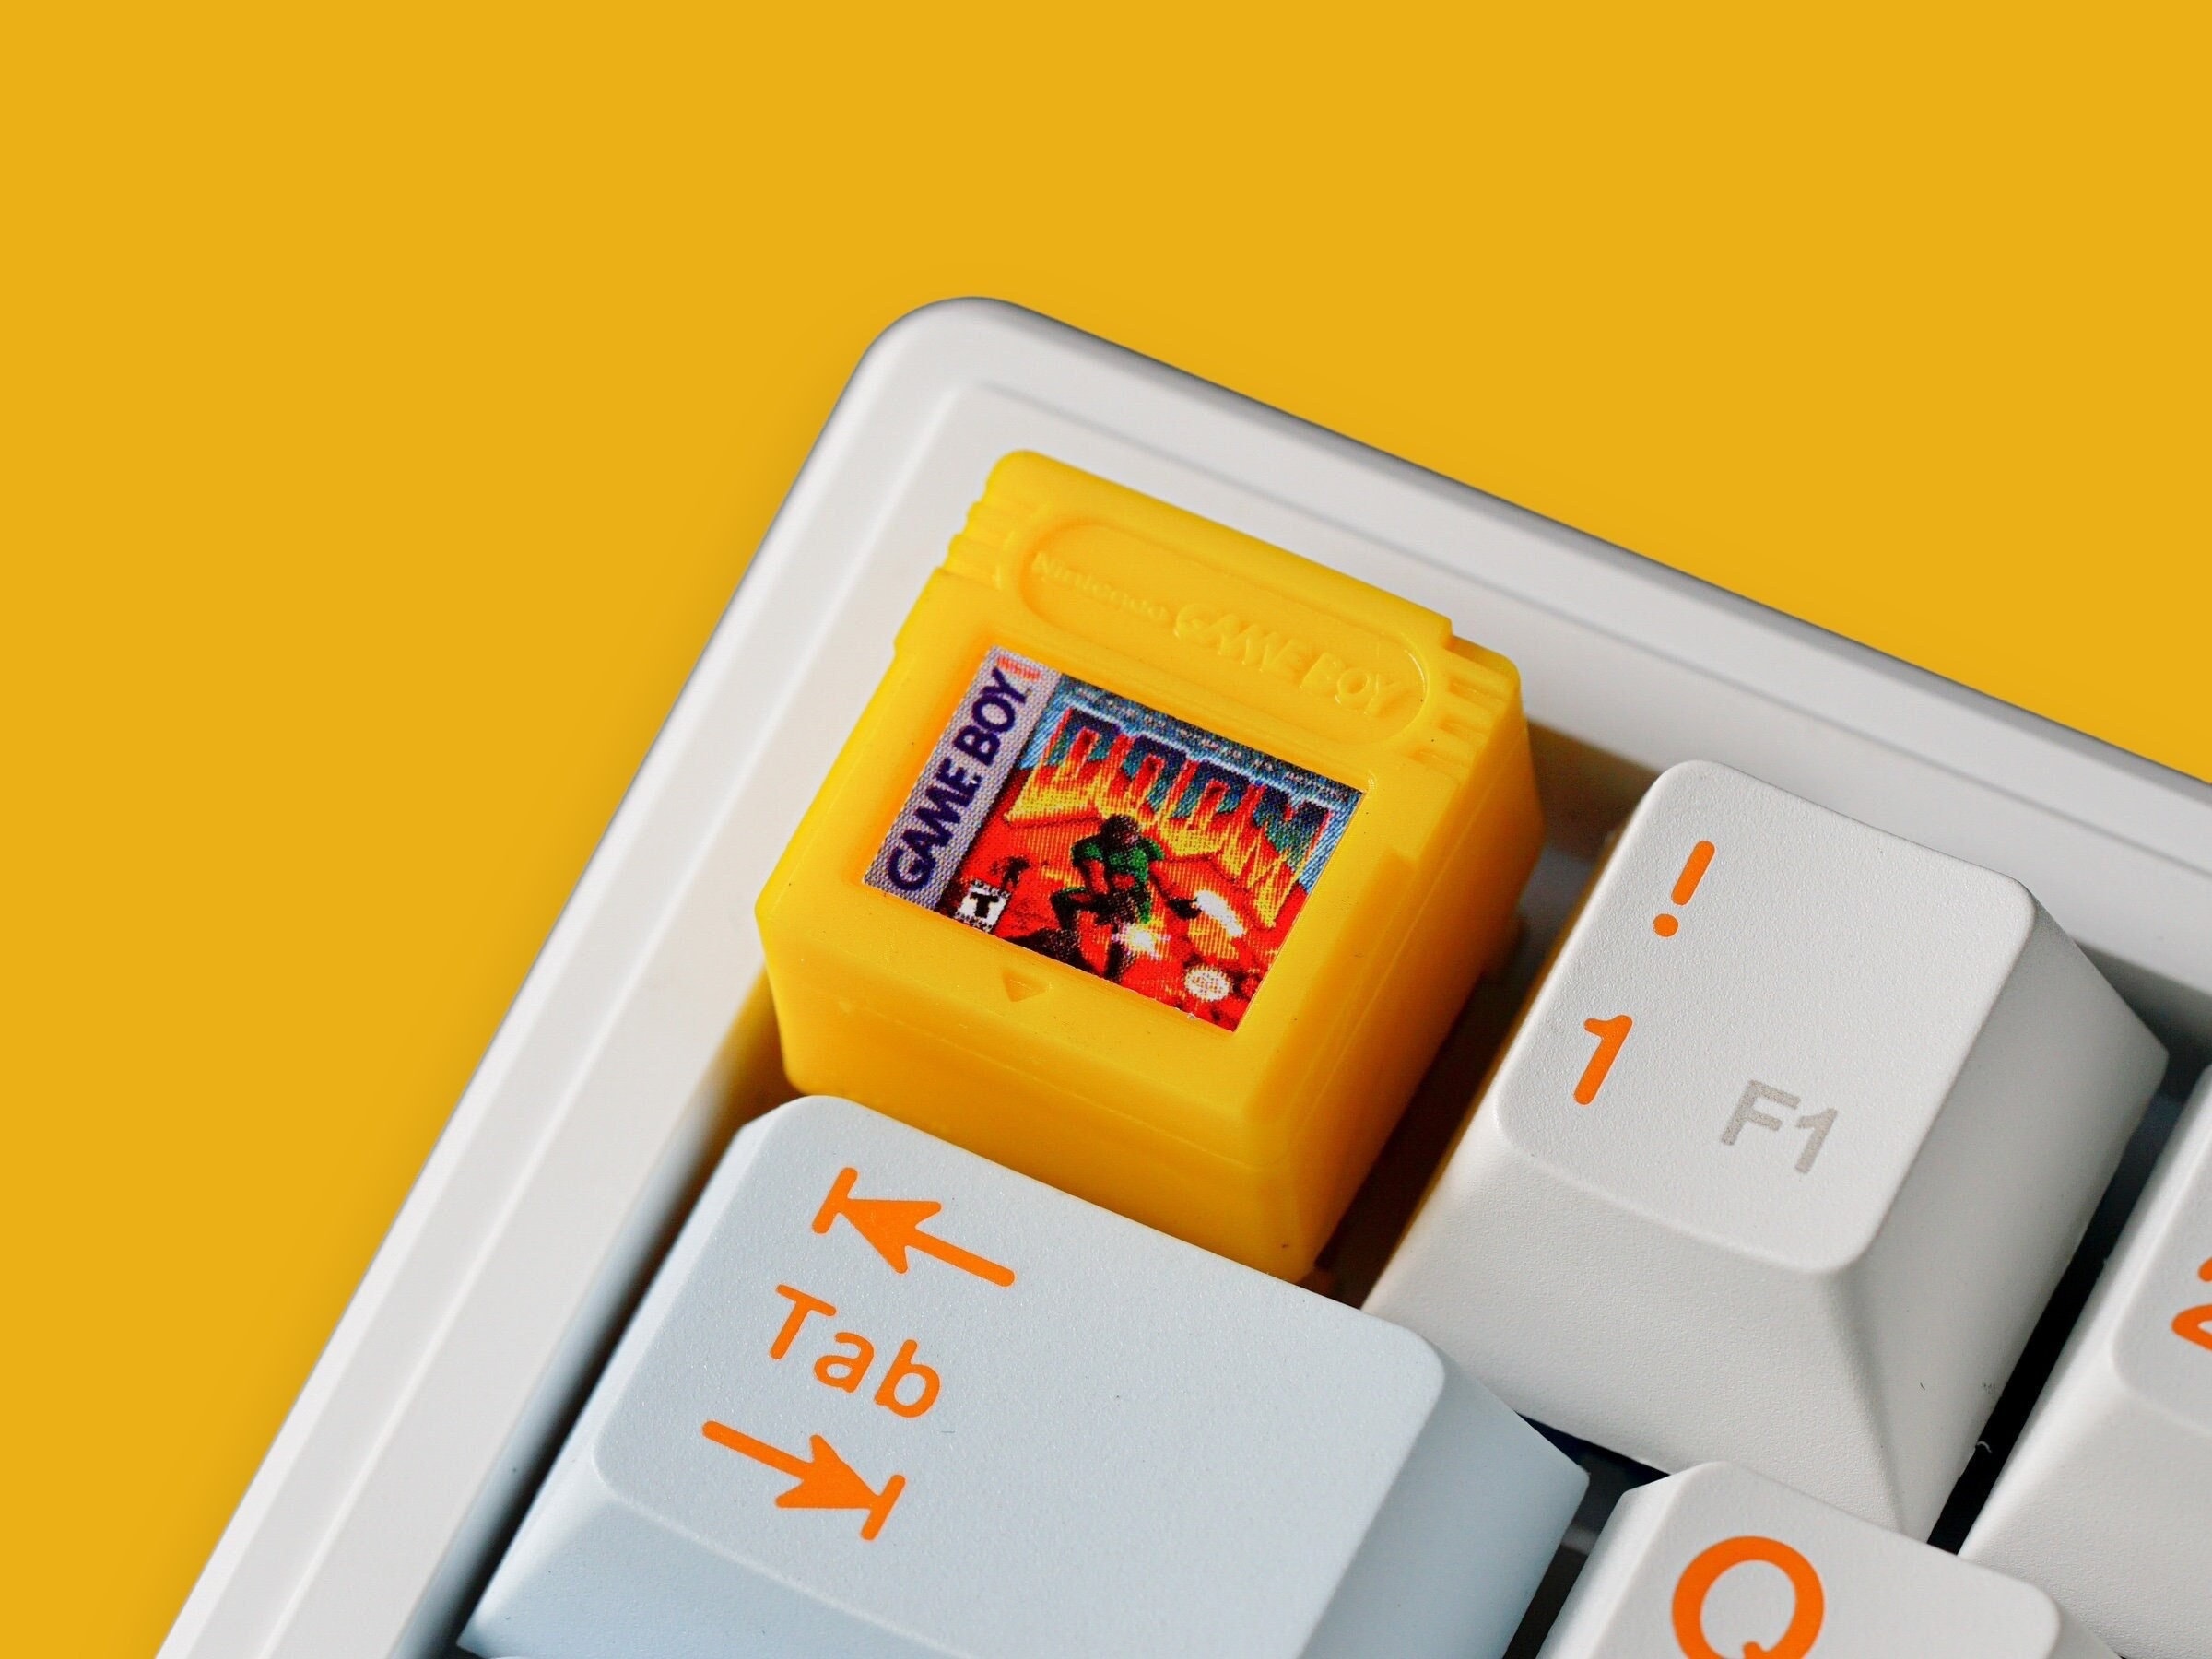 Gameboy Keycap, BOOM Gameboy Keycap, Gaming Keycap, Keycap For Cherry MX Switches Mechanical Keyboard, Gift for Him